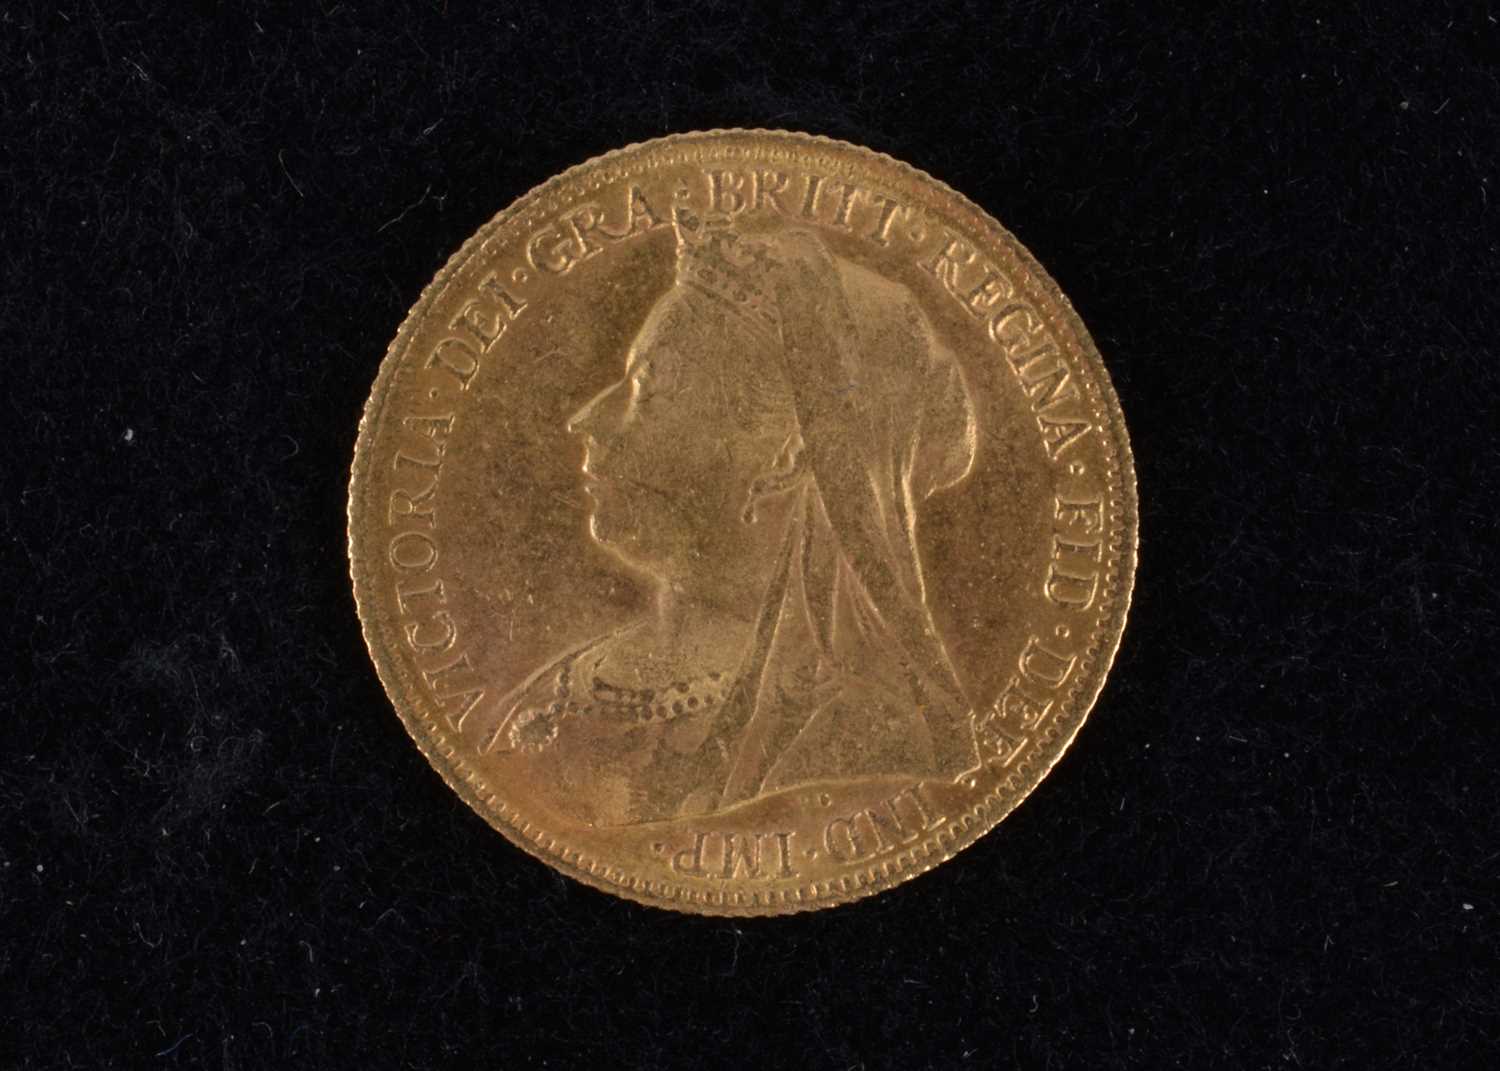 Lot 2 - A Victoria style gold coin